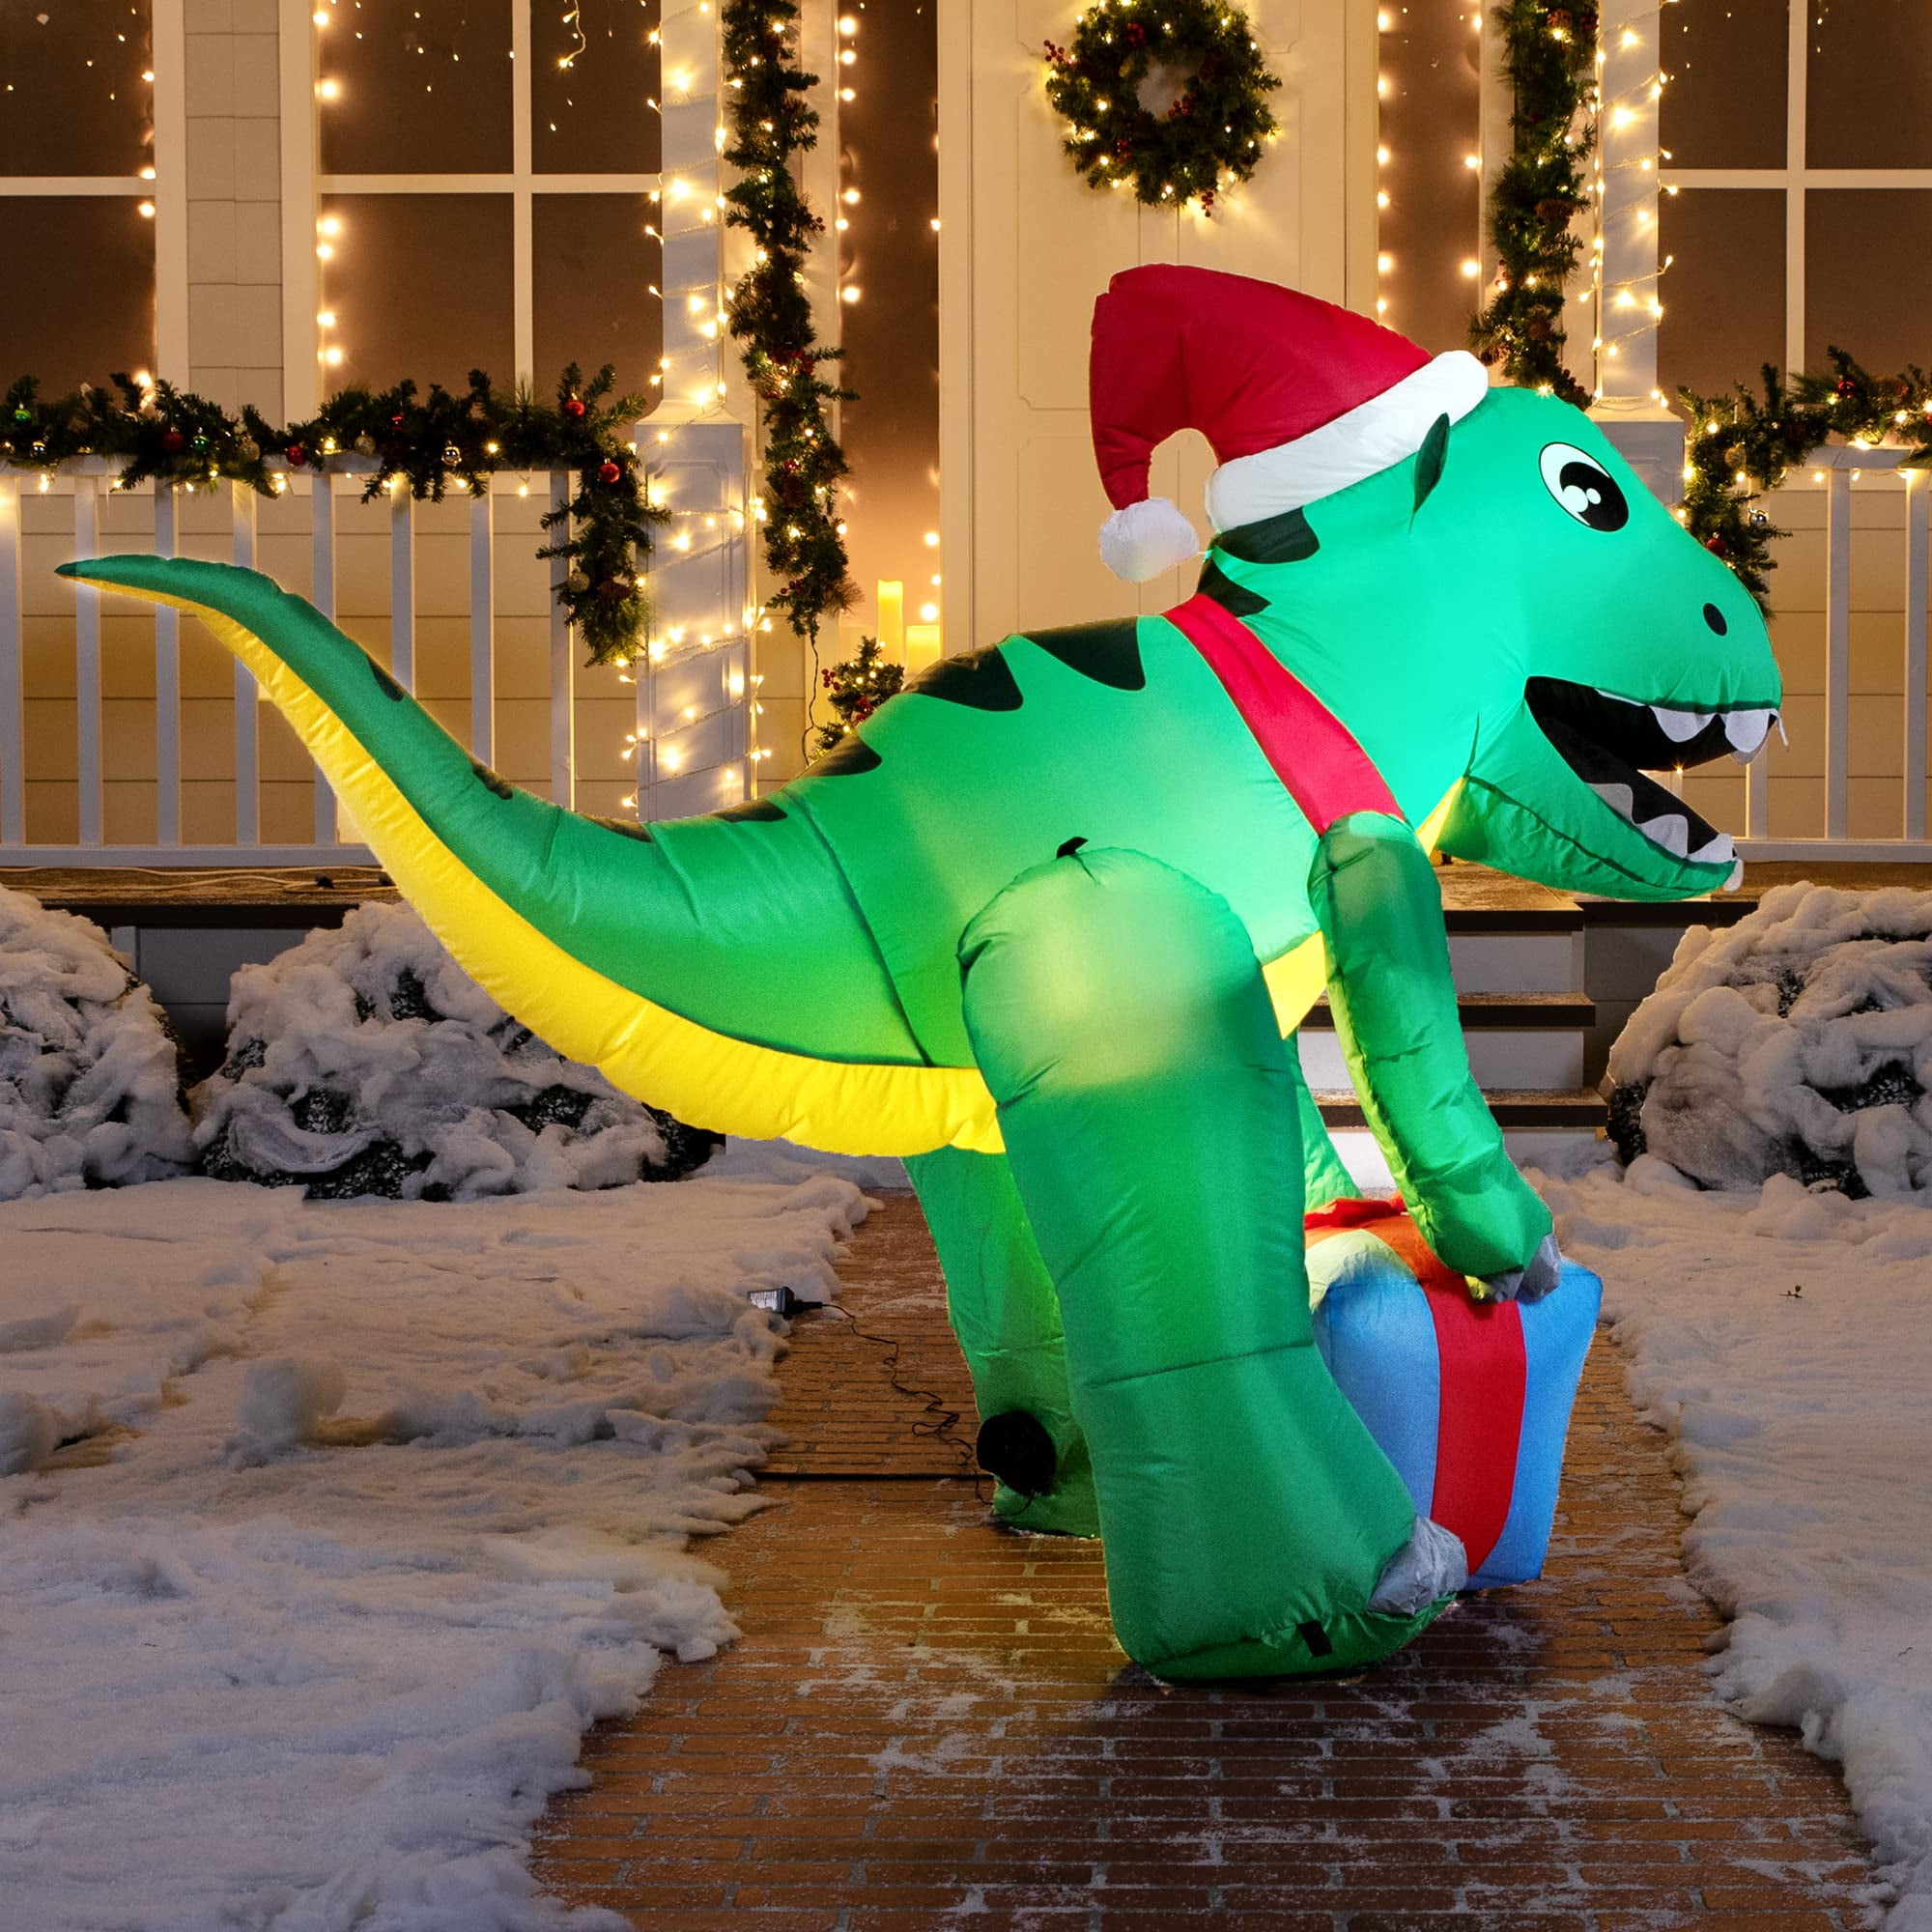 Joiedomi Inflatable Decoration 5 ft Dinosaur Self Inflatable LED Light Up Giant Blow Up Yard Décor for Xmas Holiday Indoor/Outdoor Garden Party Favor Supplies - Walmart.com